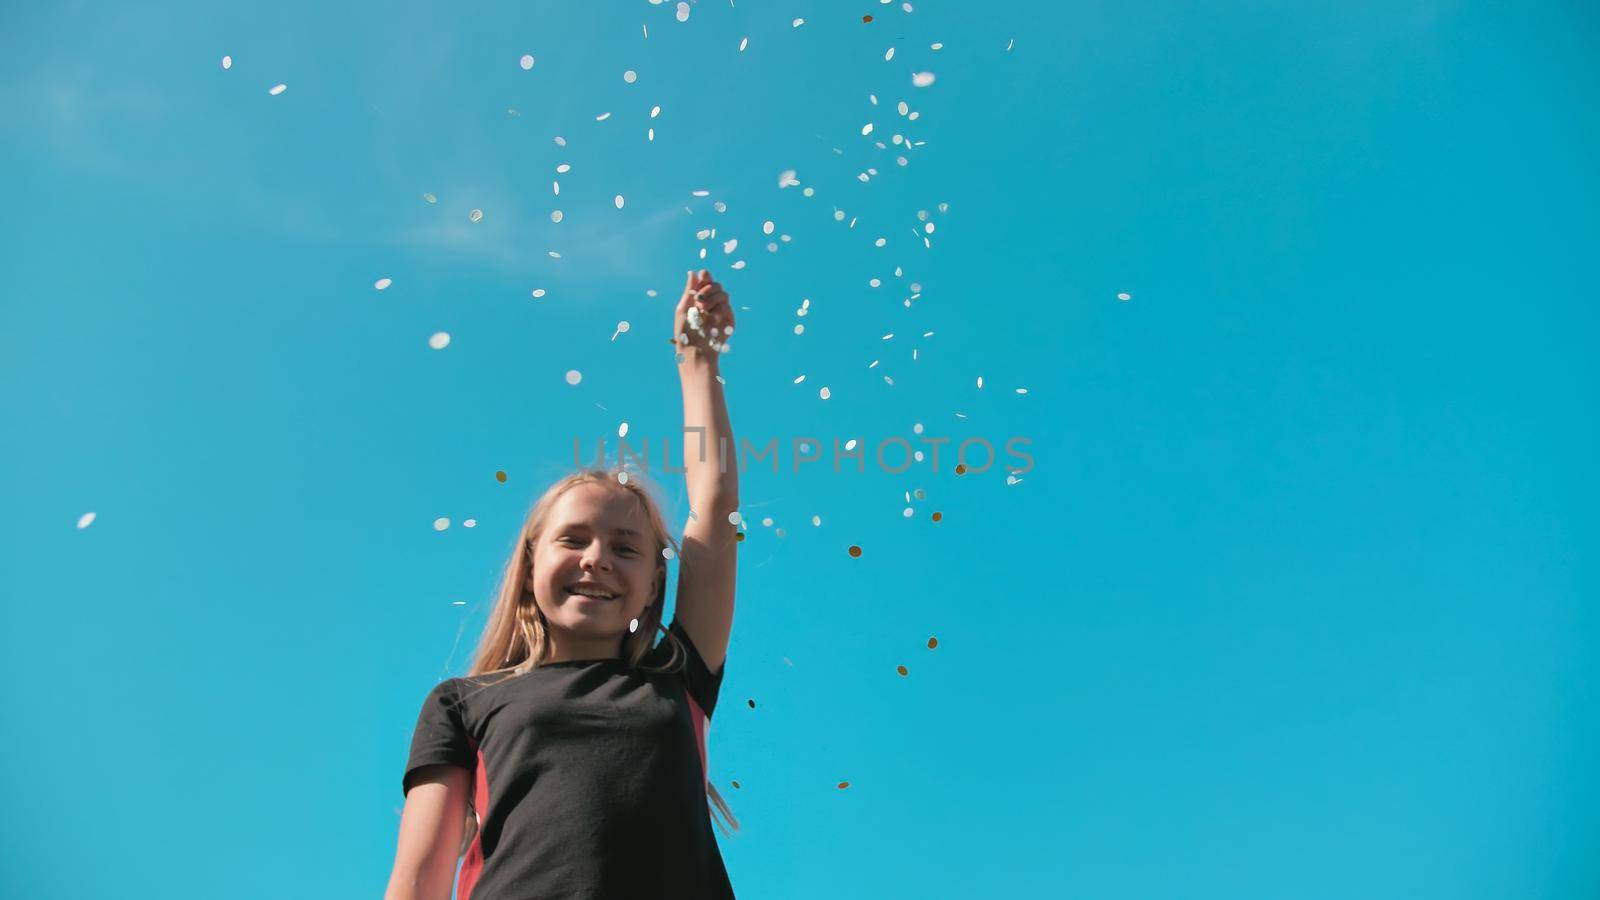 Teen girl scatters a multi-colored confetti on a background of blue sky